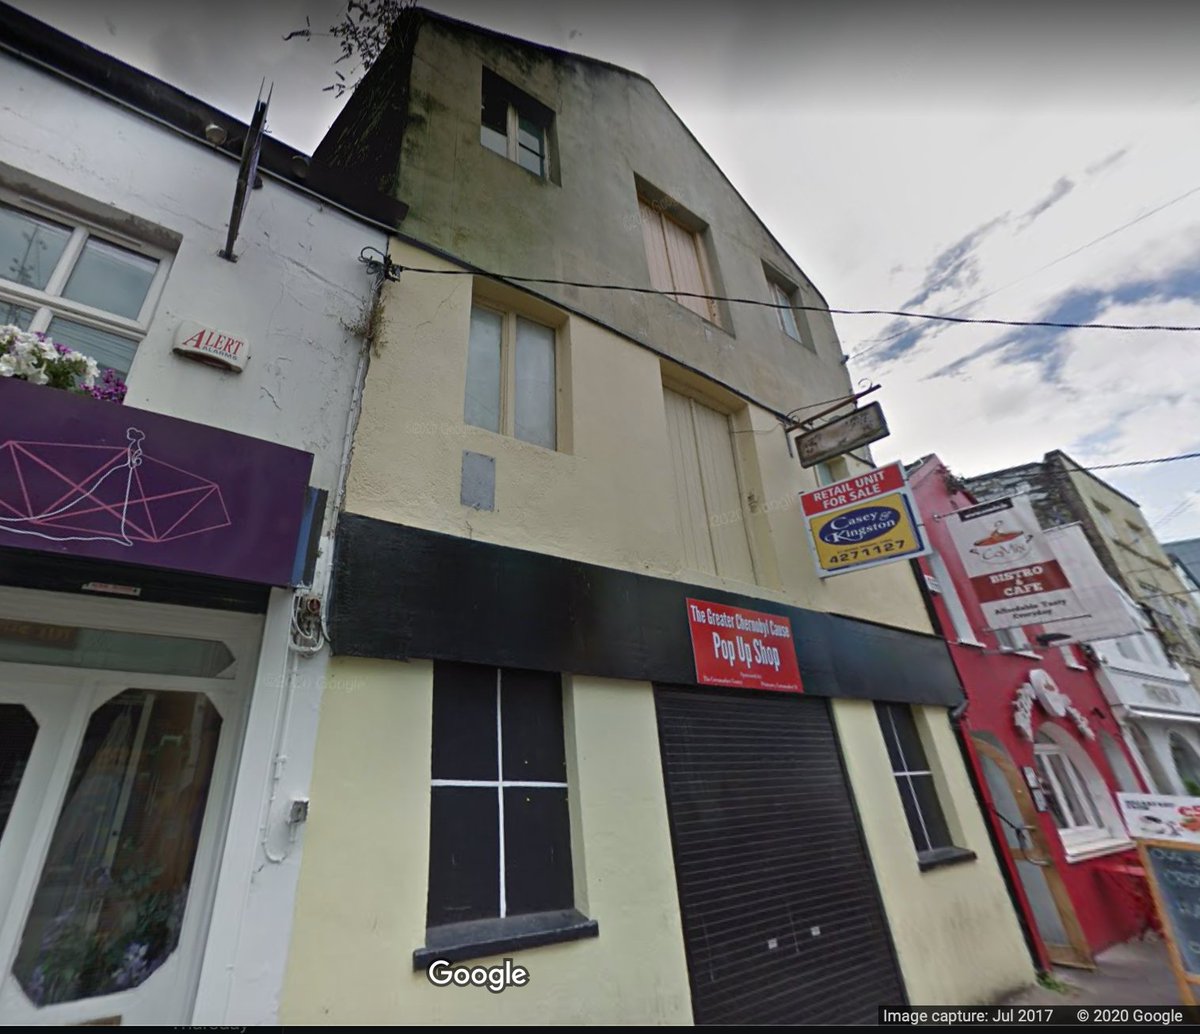 still unused & unsure what has changed since 2017 ( @googlemaps RHS), however its positive it sold at some stageit's a lovely property so it comes back to life soon & becomes someones home, studio, shop, cafe in Cork city centreNo.189  #regeneration  #respect  #economy  #local